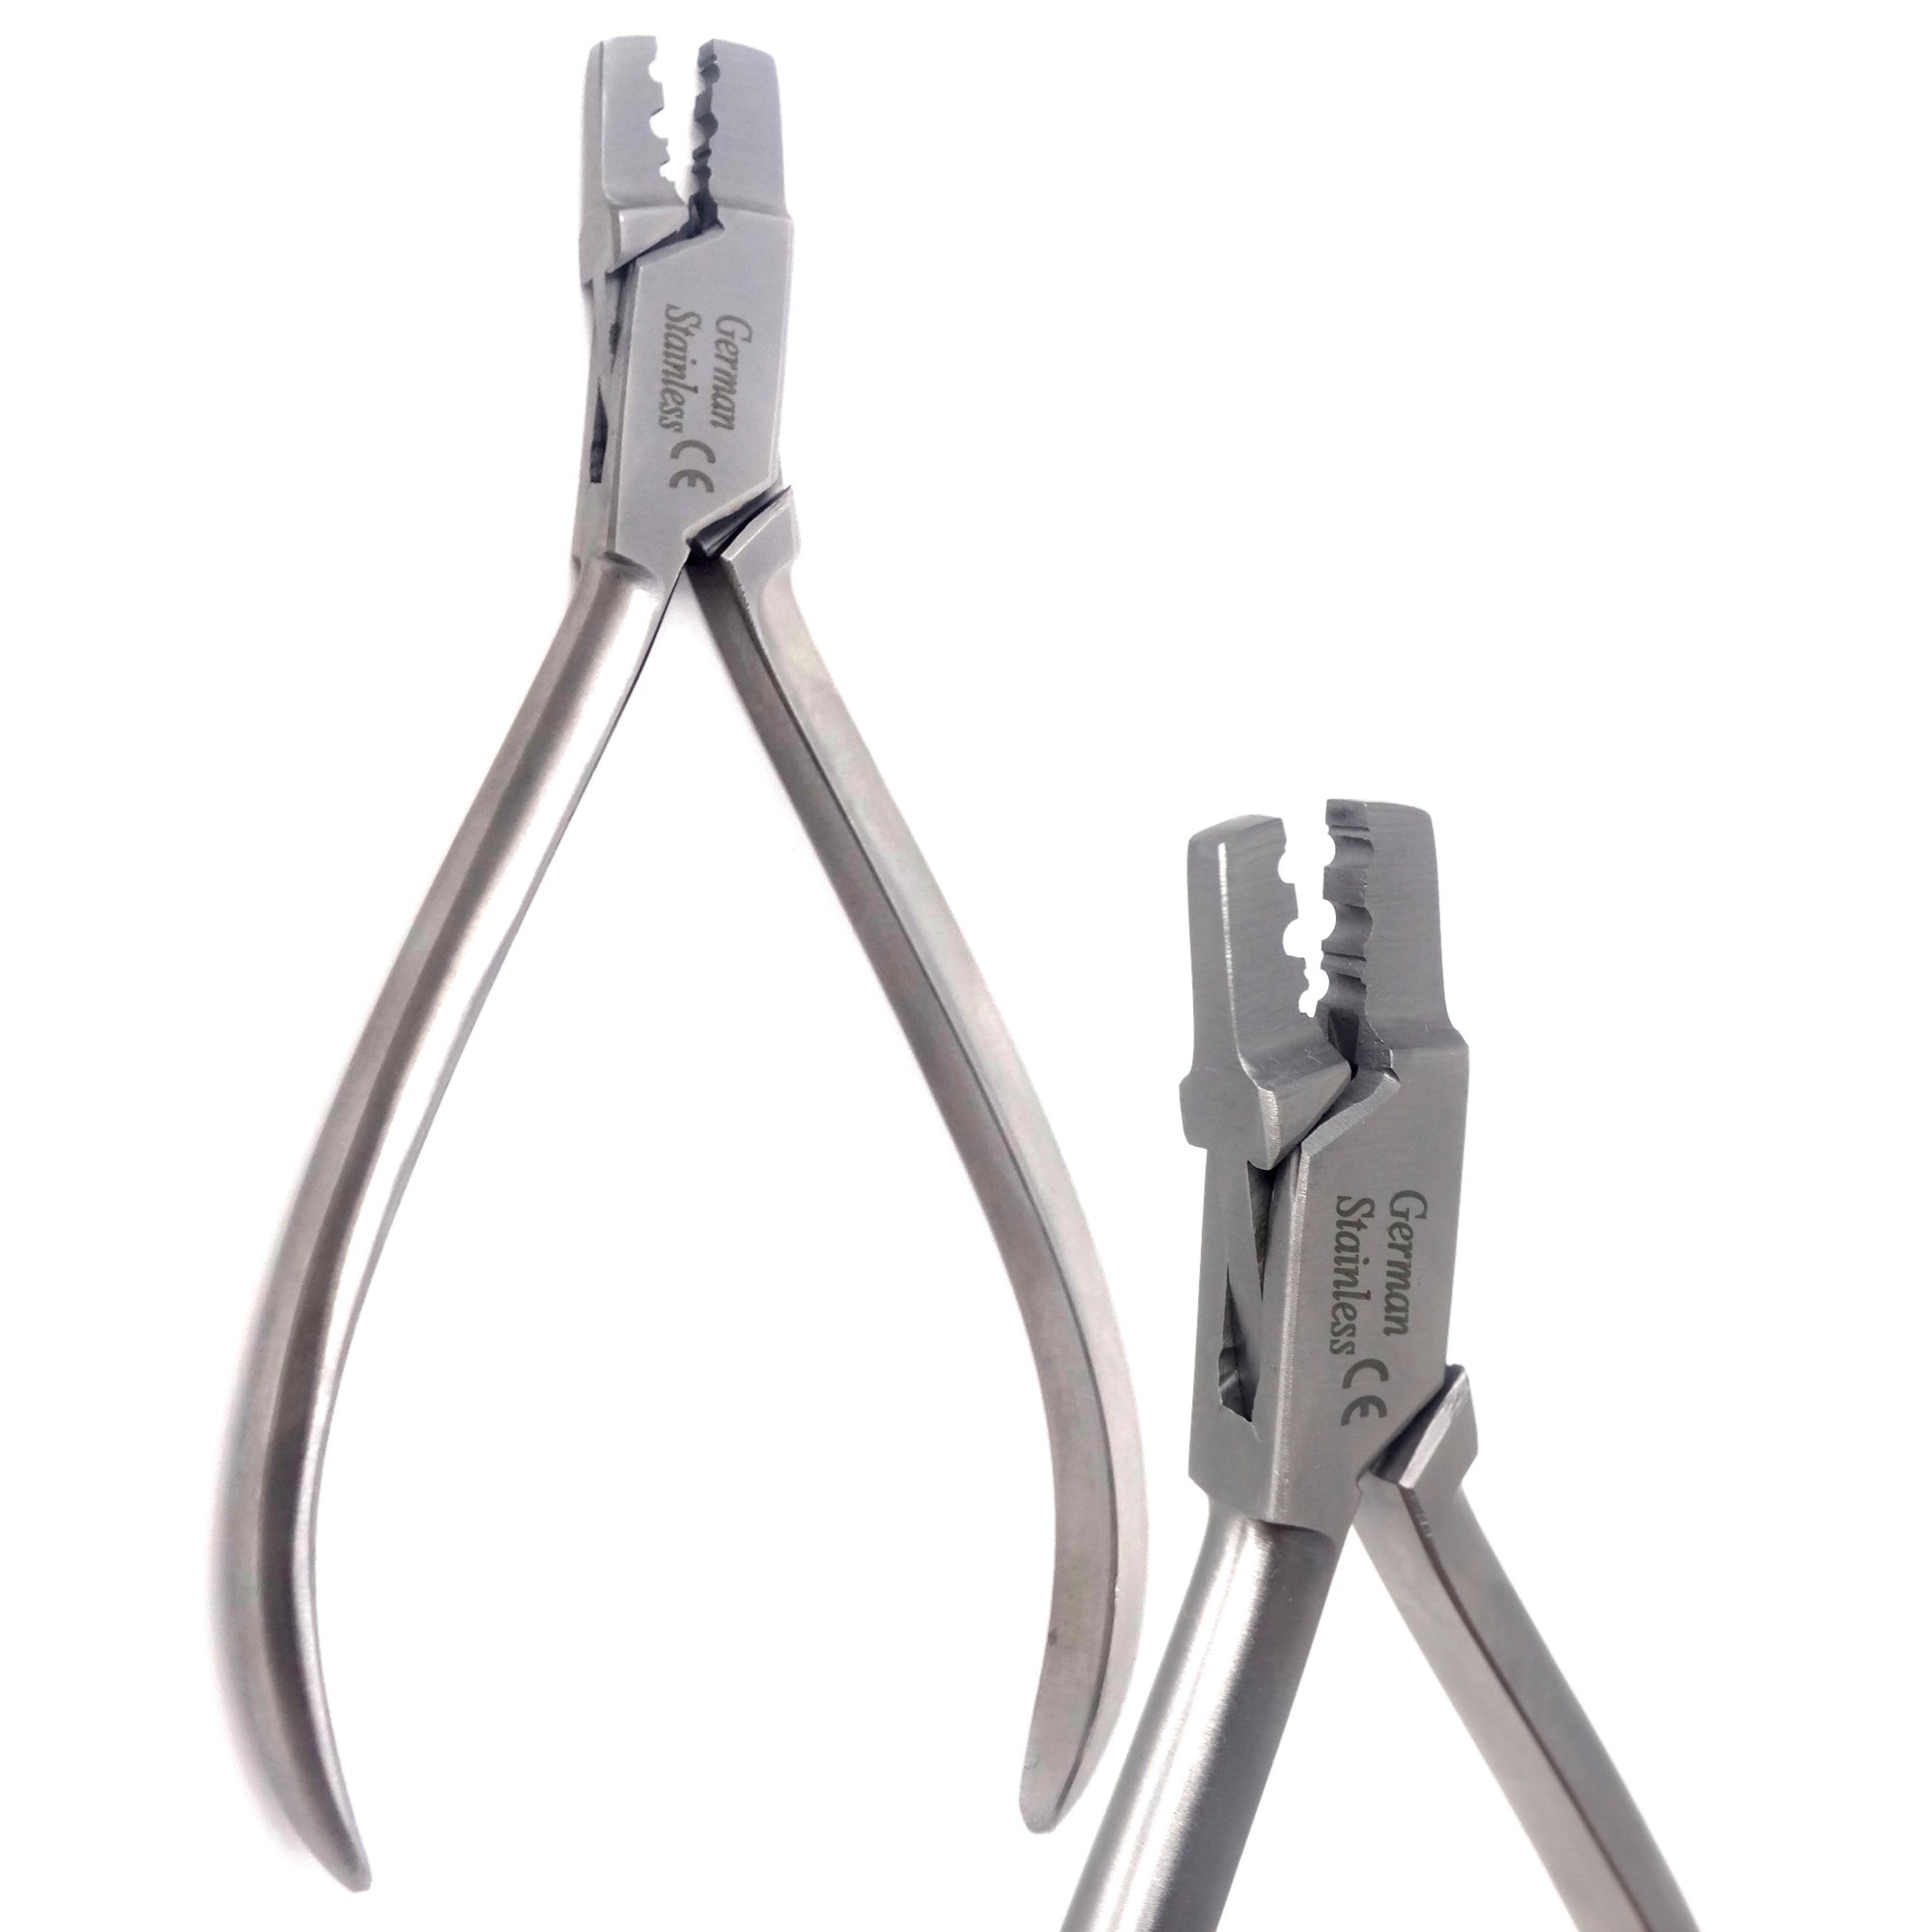 Jewelry Pliers for Wire Bending Beading DIY Projects Stainless